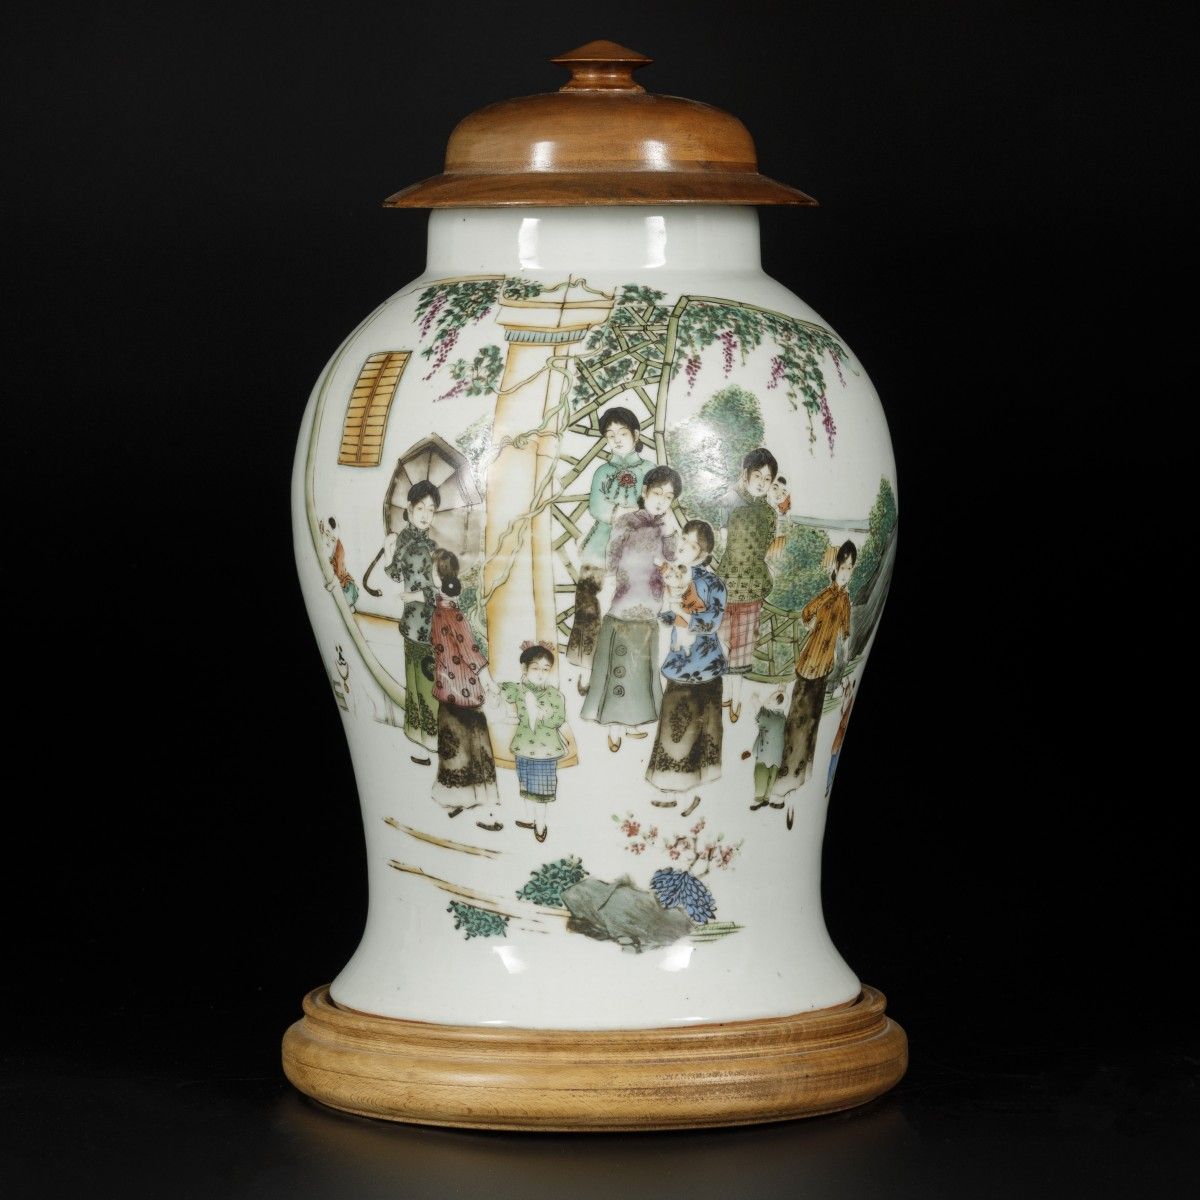 A porcelain lidded vase with Qianjiang Cai decor, China, 19/20th century. Con co&hellip;